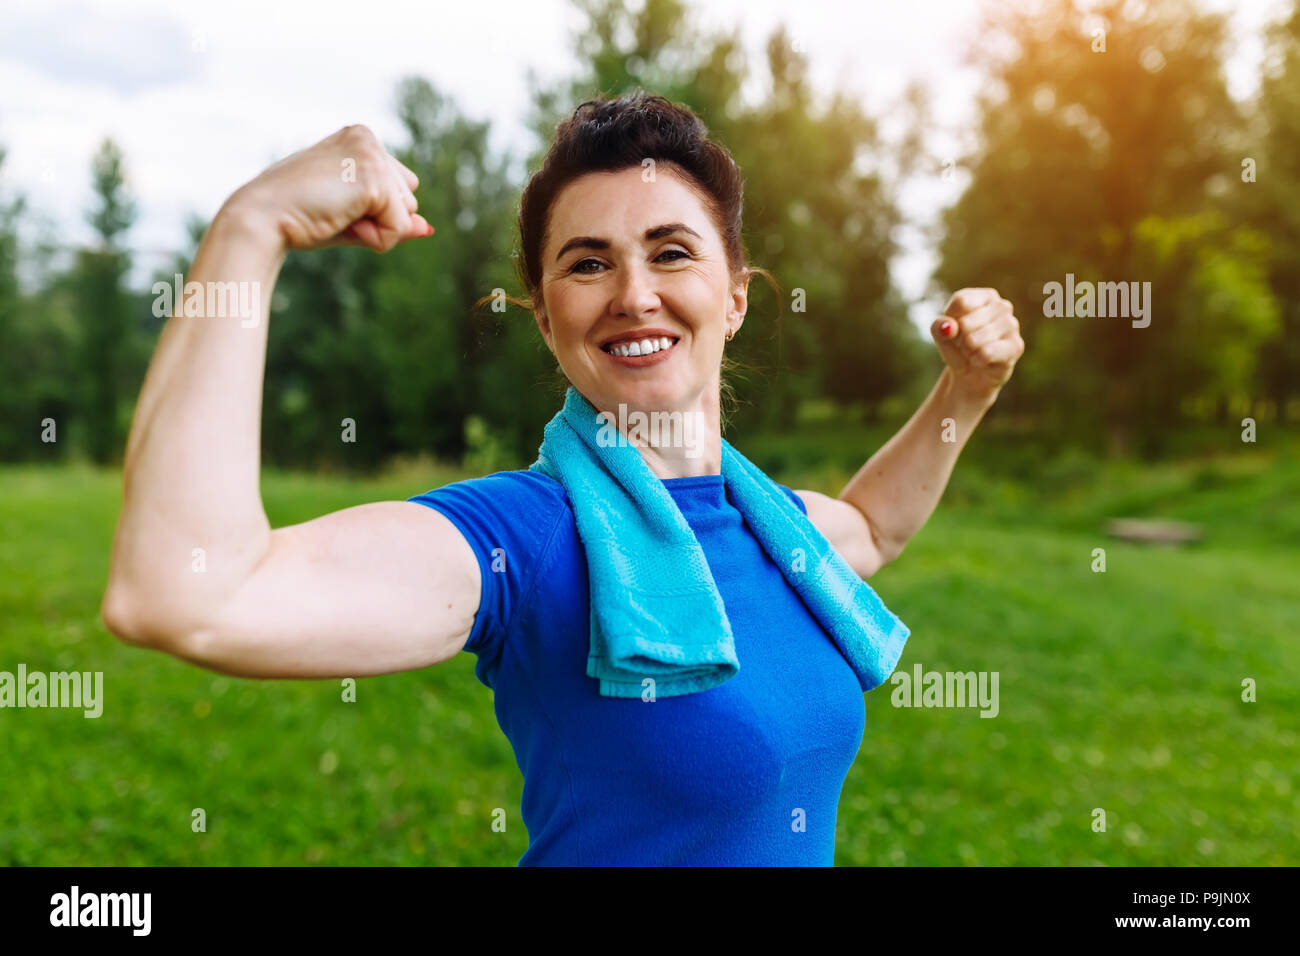 Smiling Senior woman flexing muscles outdoor in park. Elderly female showing biceps. Heathy life style concept. Copyspace. Stock Photo